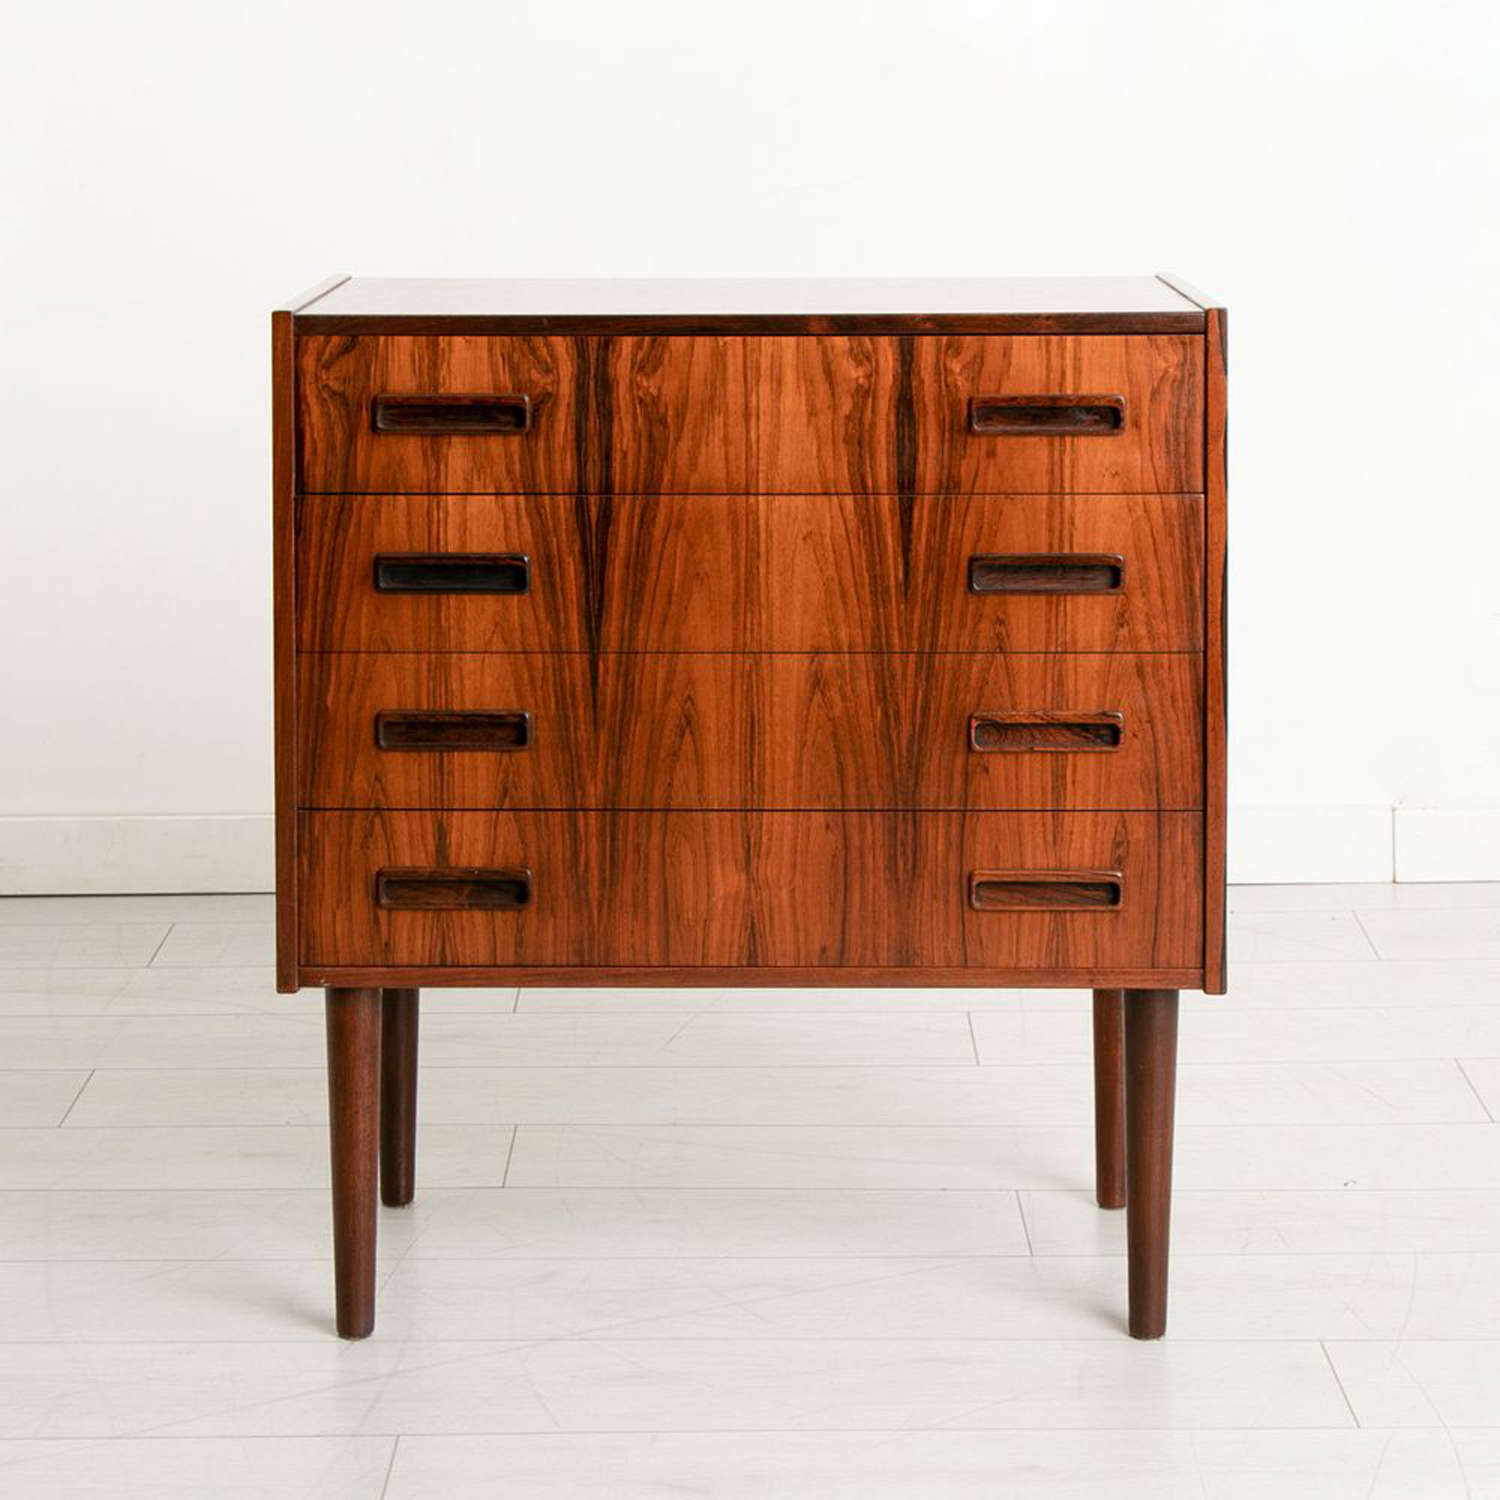 A Danish rosewood small chest